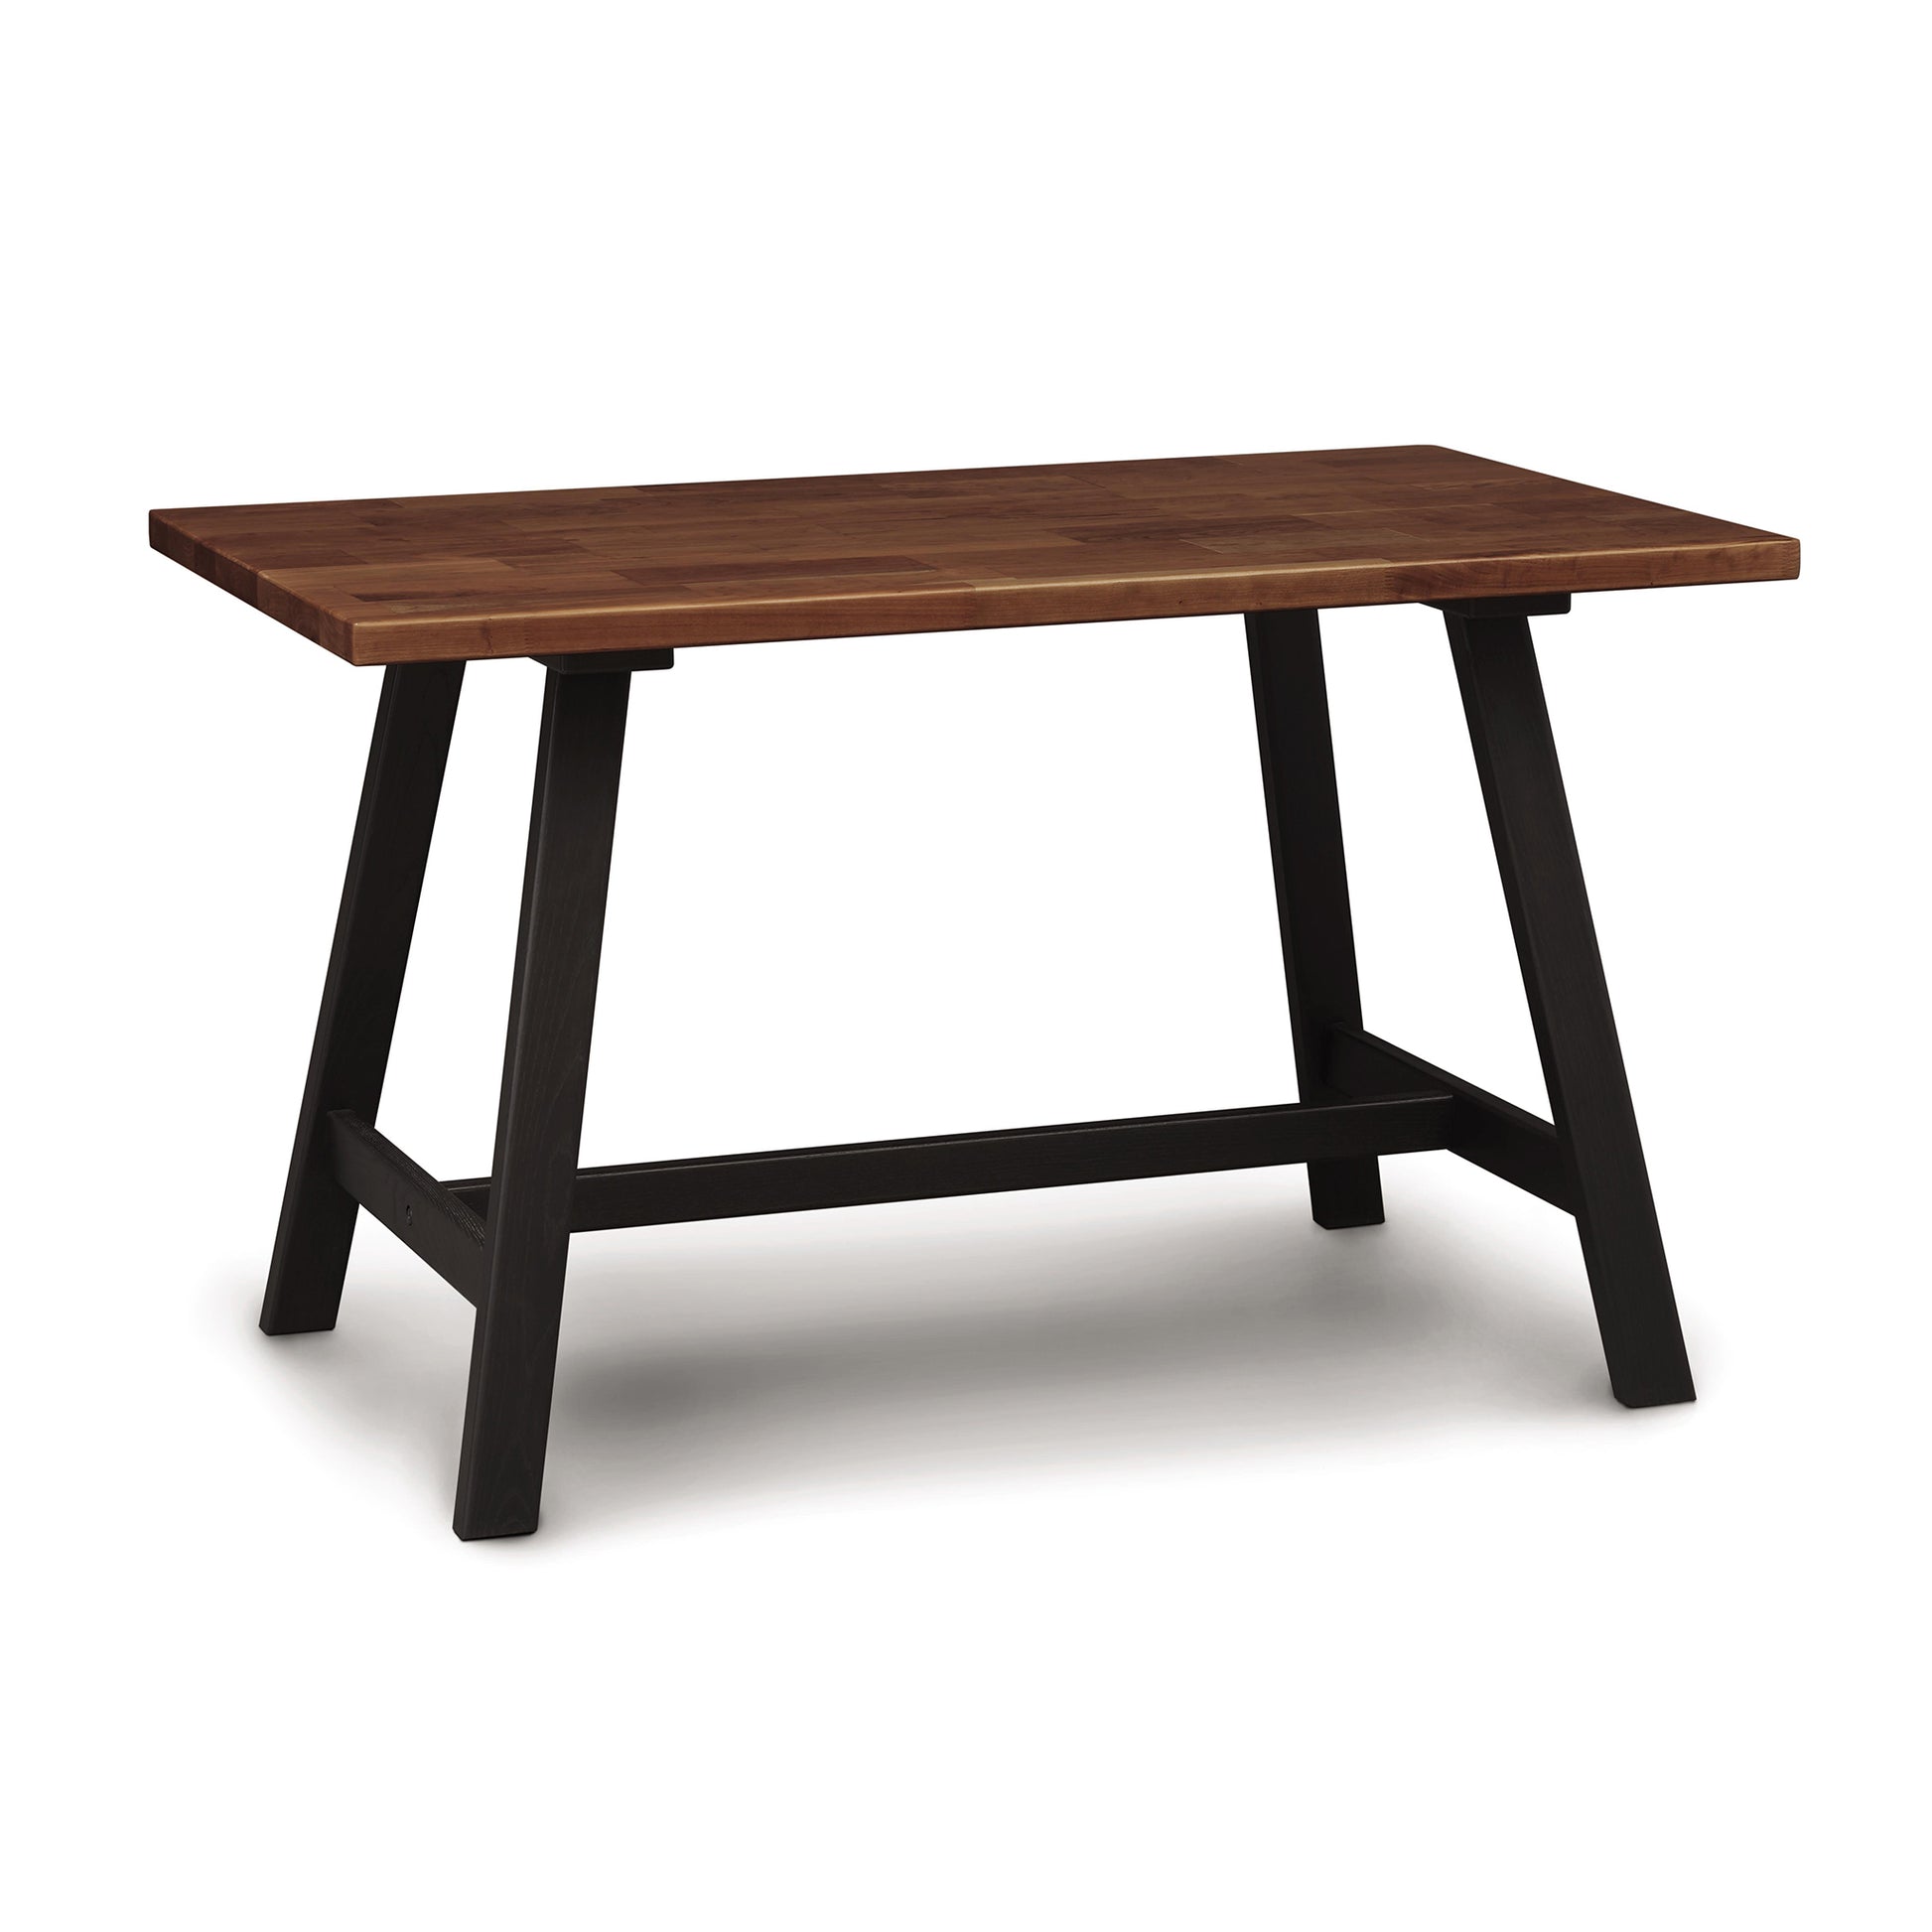 A solid hardwood table with a rectangular top and contrasting black a-frame legs, designed for the Copeland Furniture Modern Farmhouse Counter Height Farm Table style.